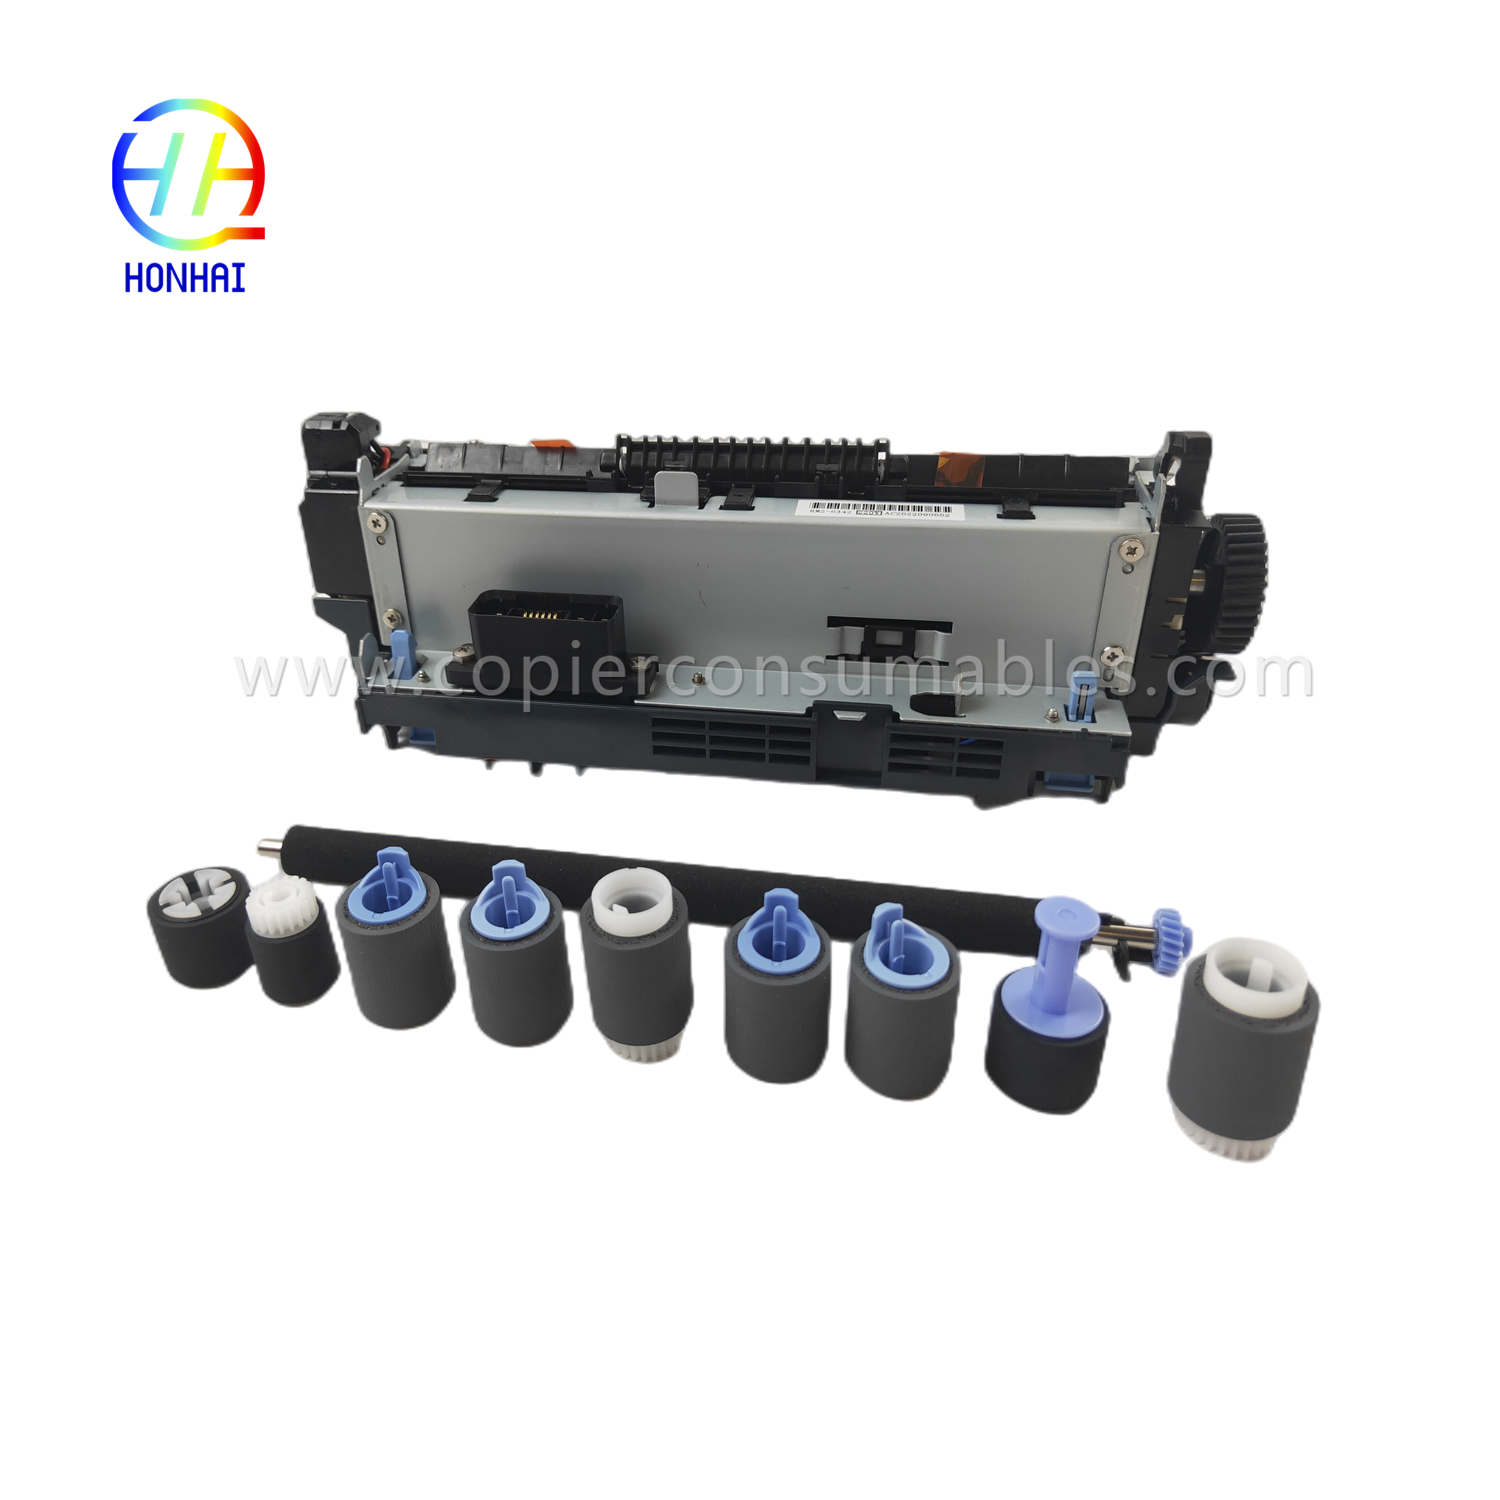 https://c585.goodao.net/ ئاسراش-kit-for-hp-m604-m605-m606-f2g77a-2-product/